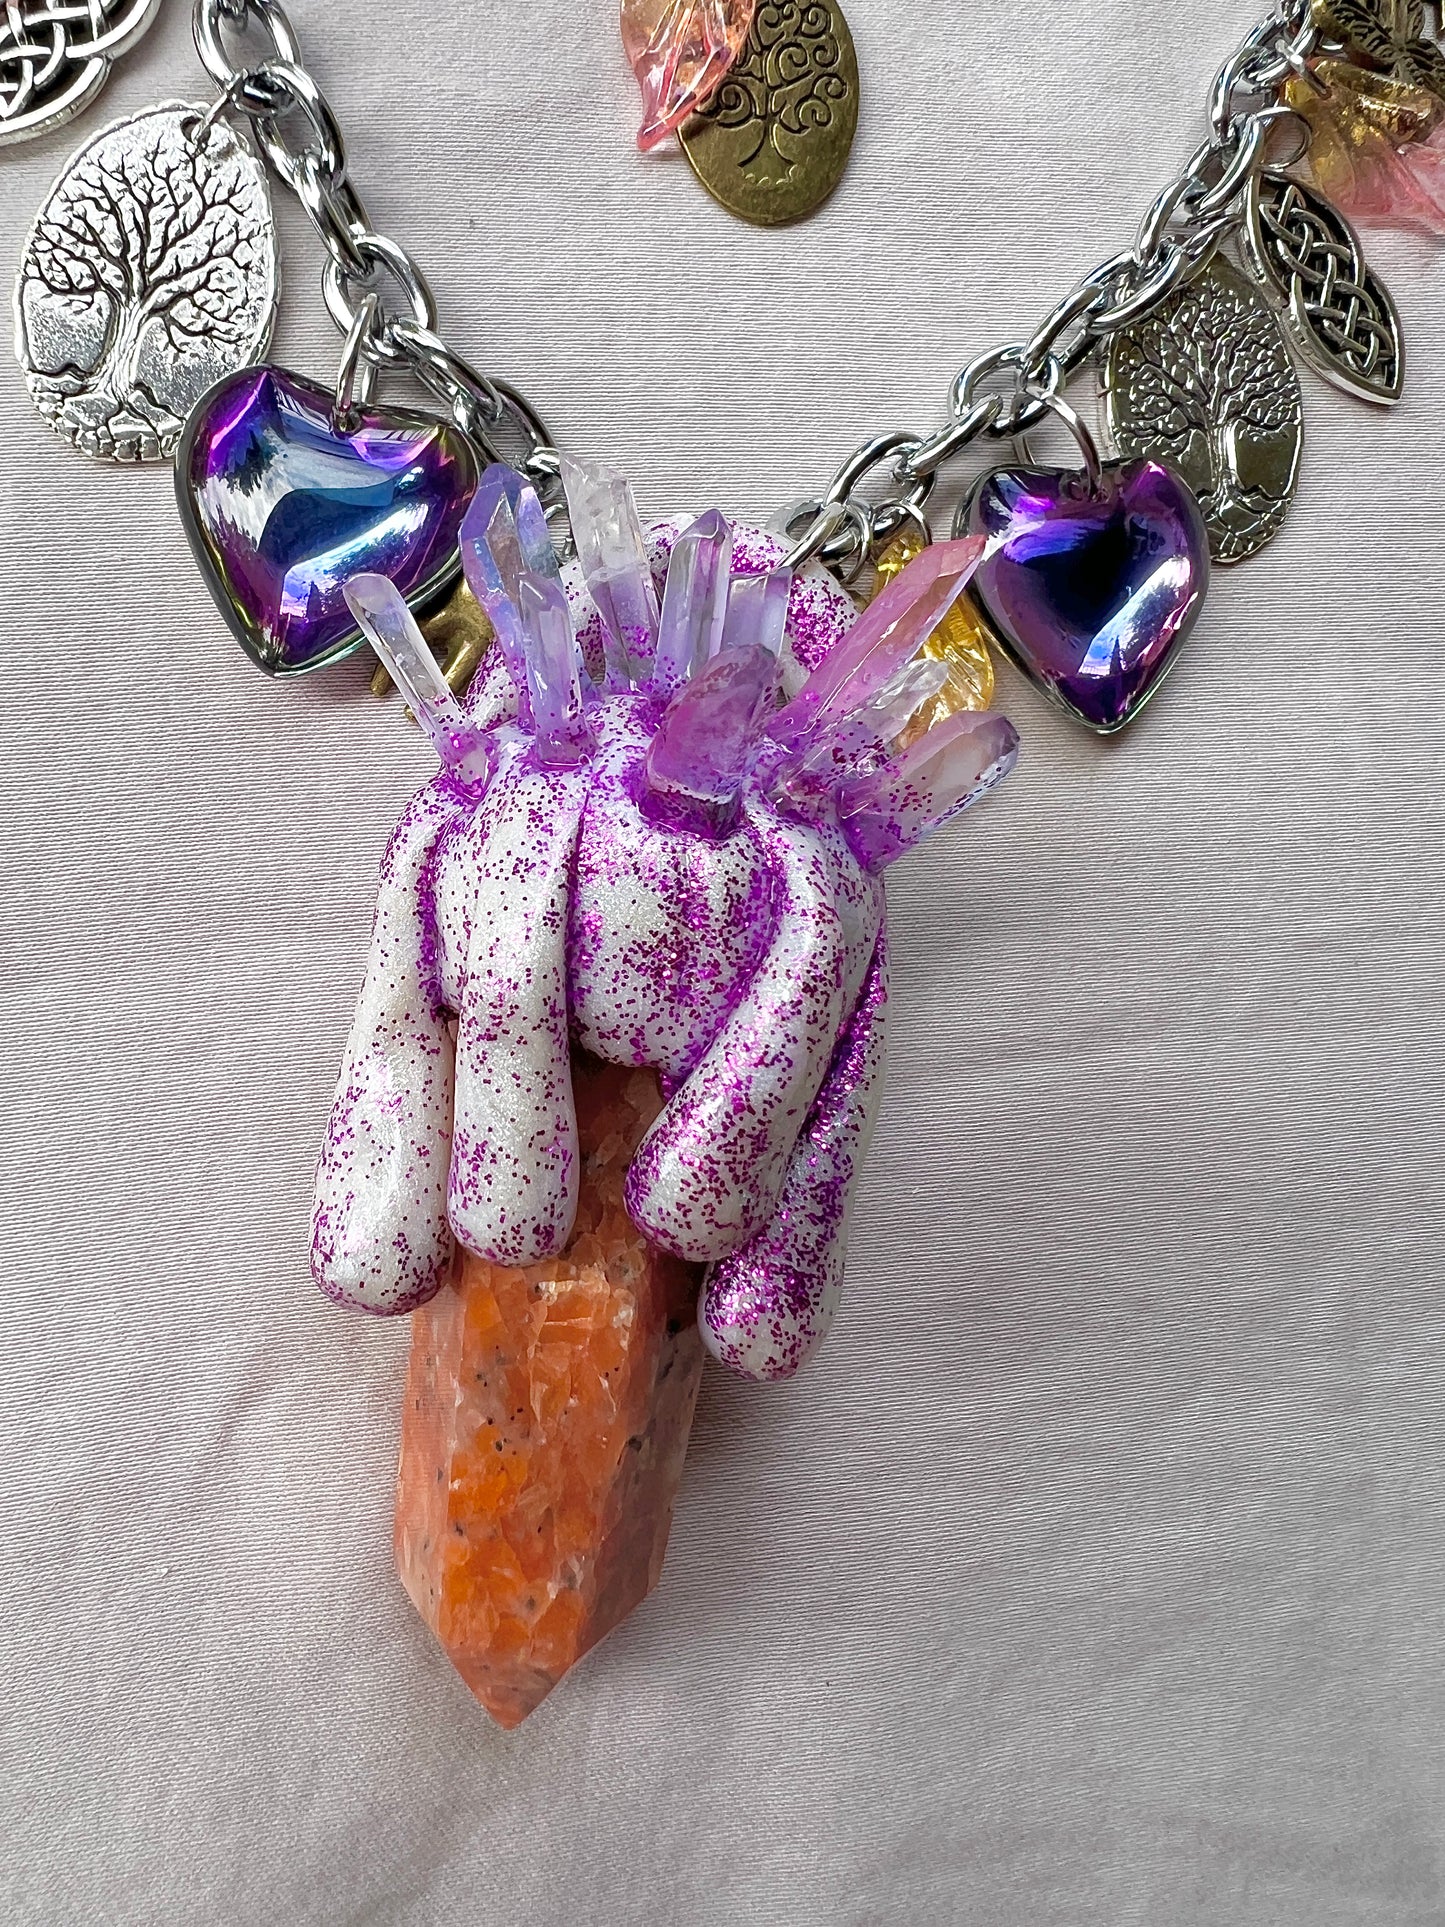 Inner Fire Crystal Amulet Fantasy Chain